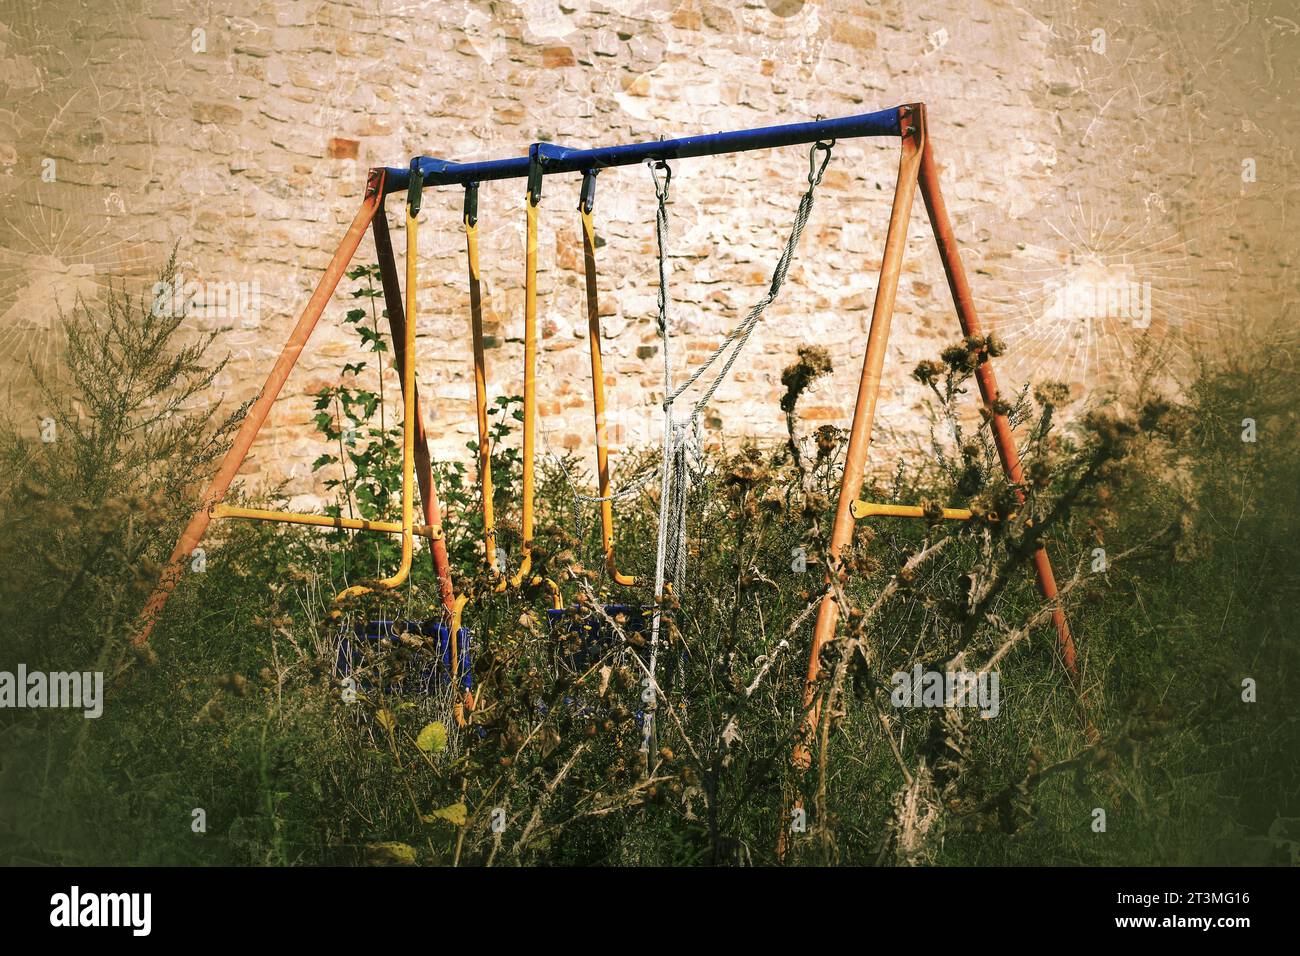 Abandoned swing in thistles in scary, grungy image. Stock Photo